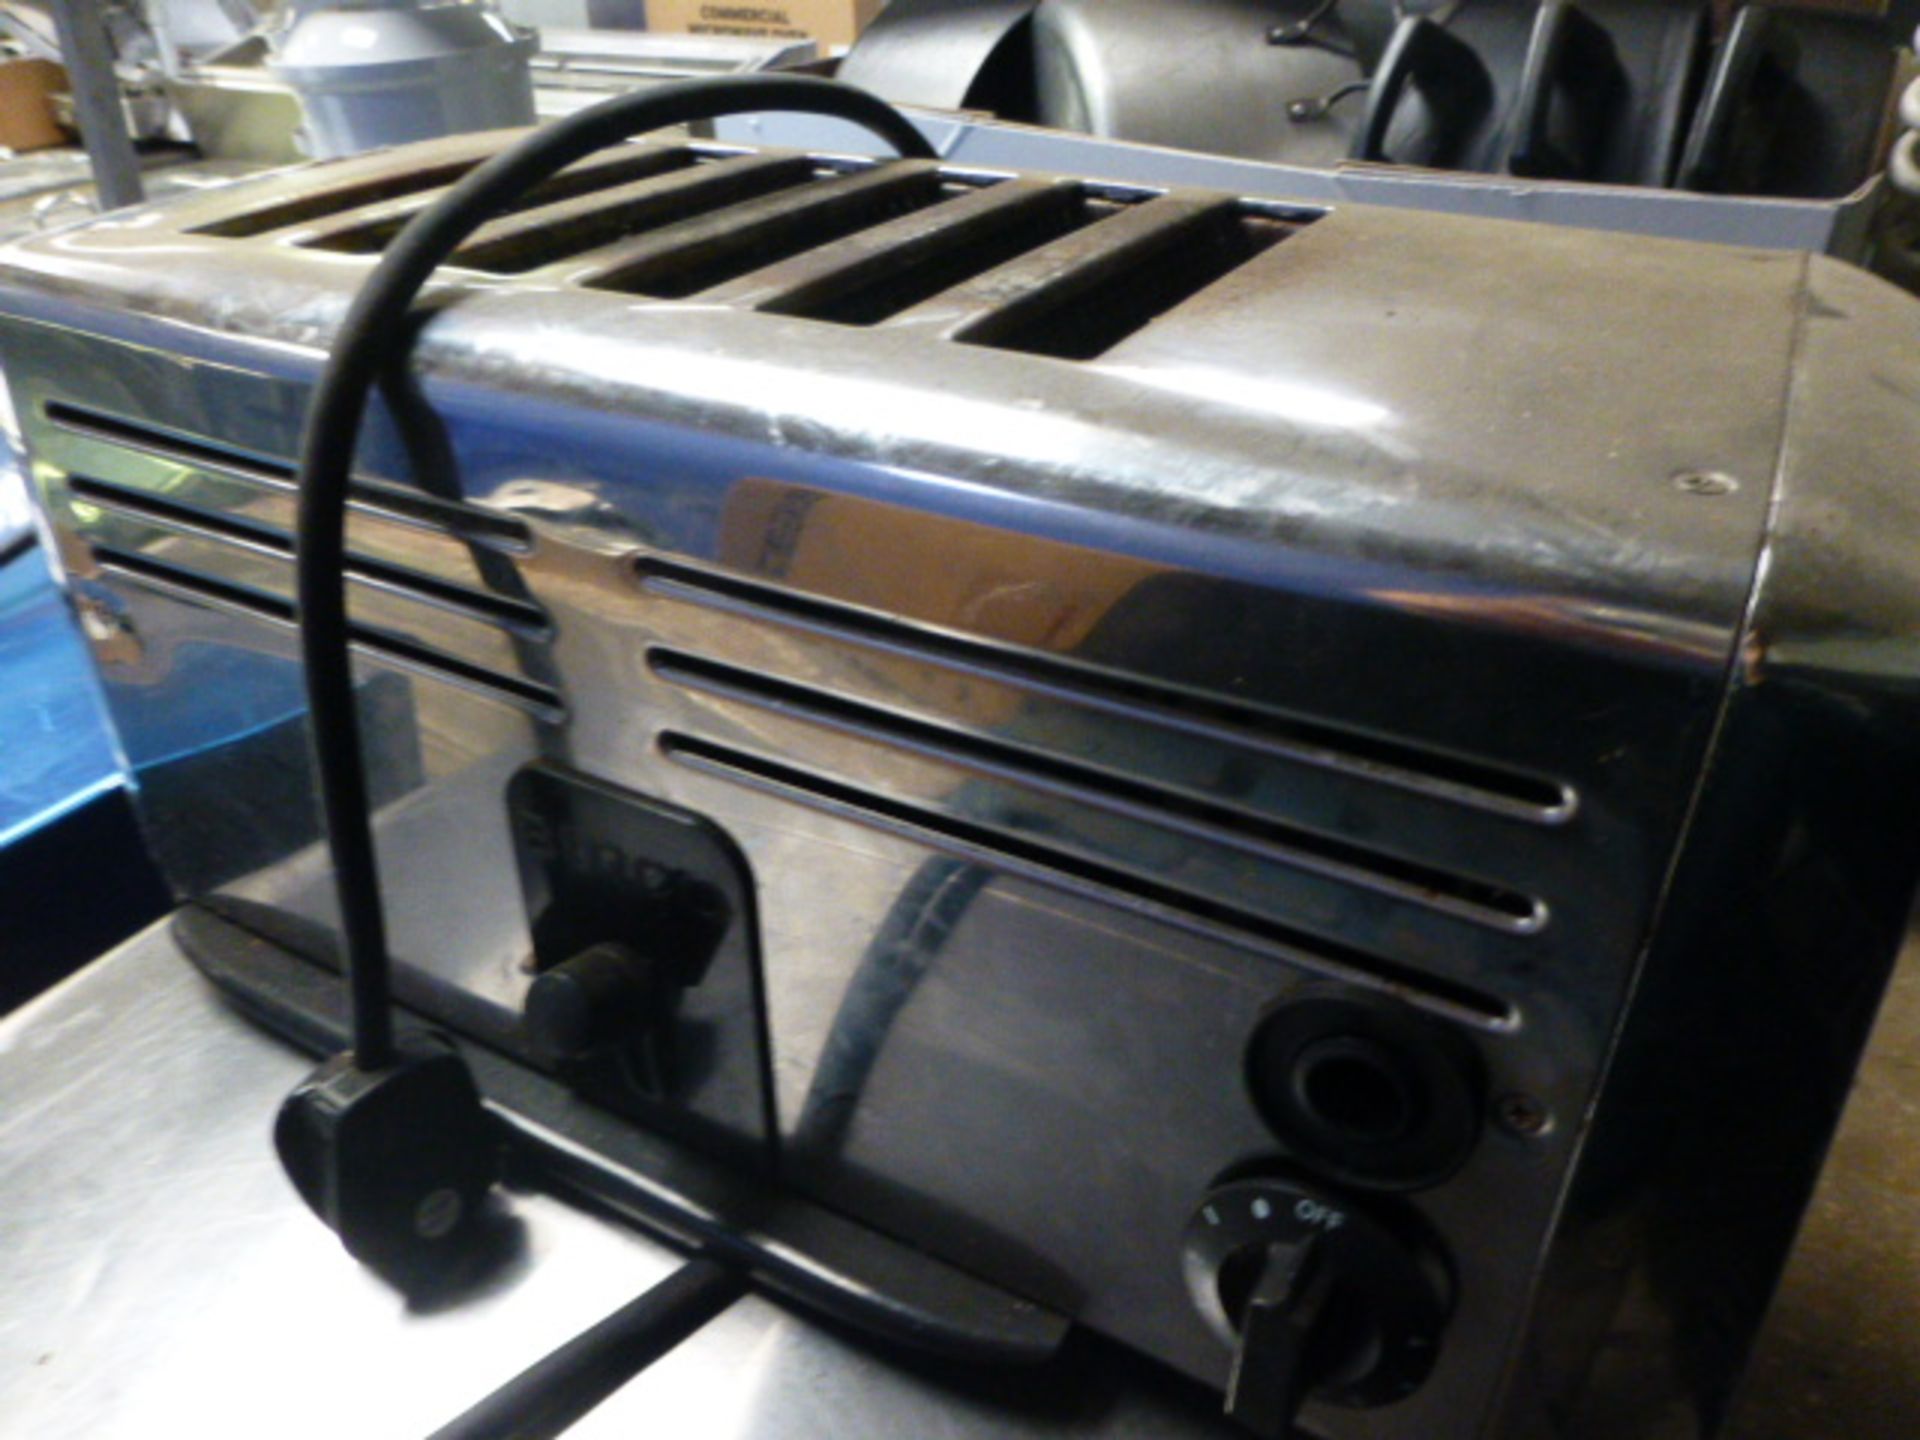 (37) Burco 6 slice commercial toaster